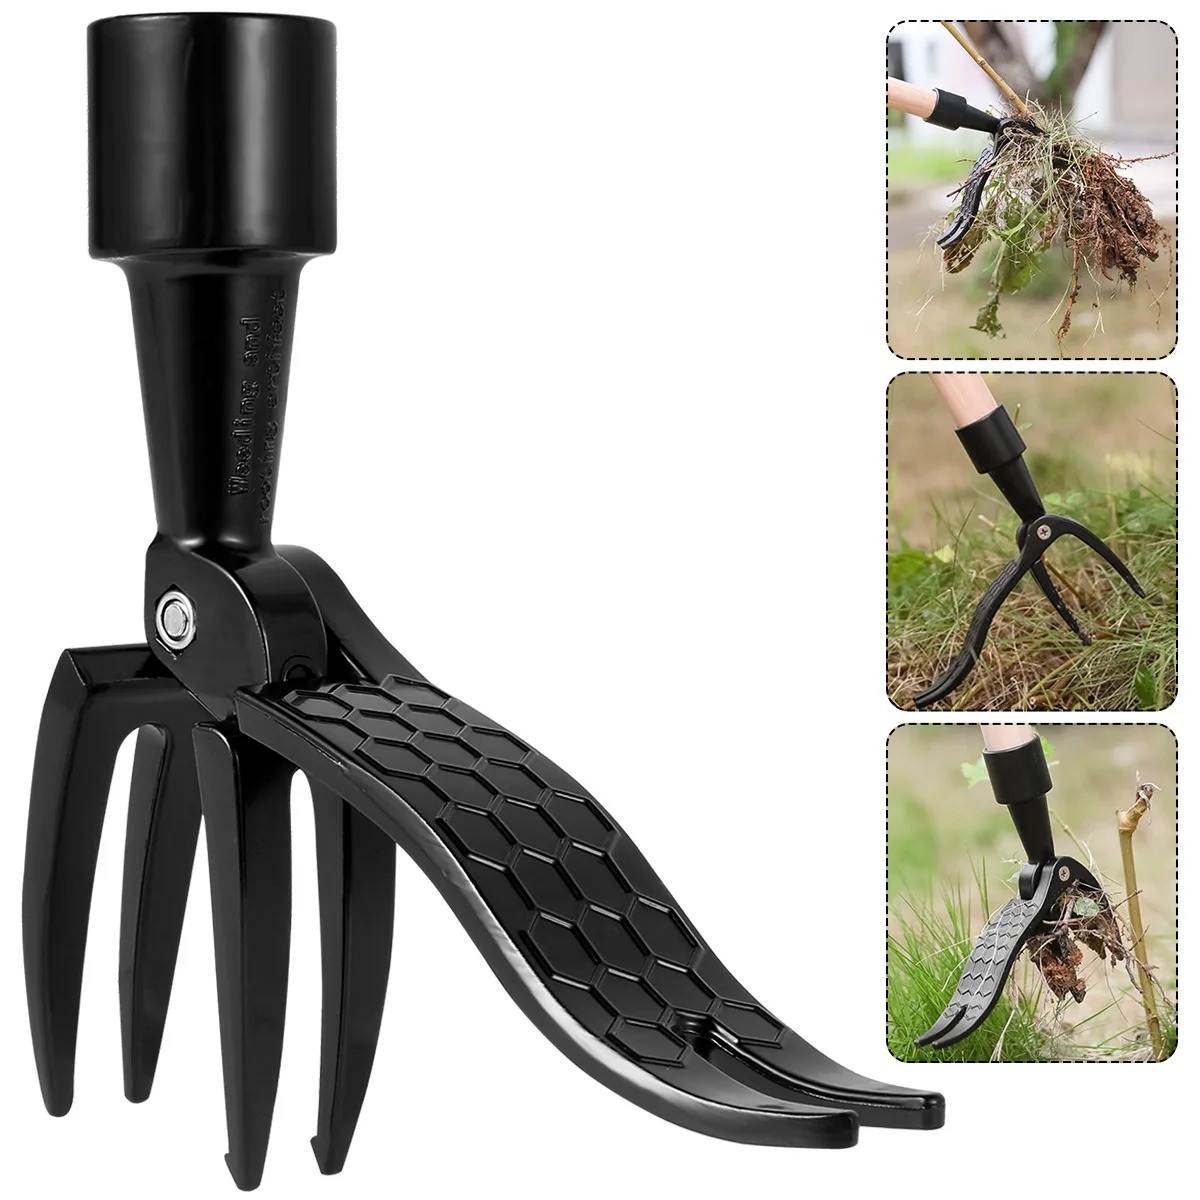 Newest High Quality Weeding Head Replacement Metal Weed Puller Head Gardening Digging Weeder Removal Accessory Garden Tool